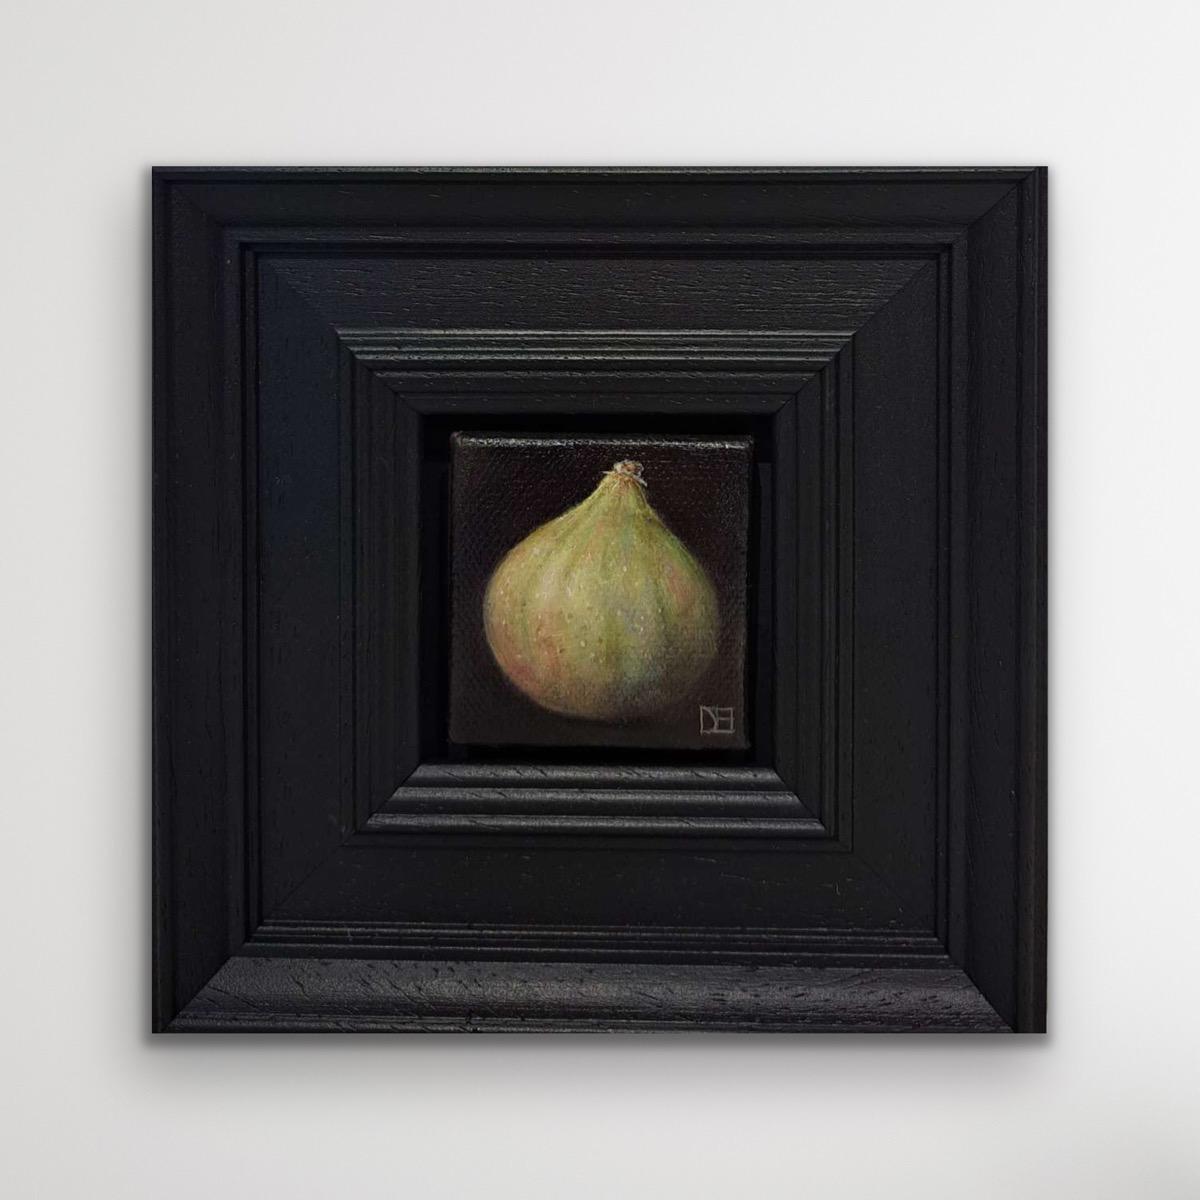 Pocket Round Green Fig is an original oil painting by Dani Humberstone as part of her Pocket Painting series featuring small scale realistic oil paintings, with a nod to baroque still life painting. The paitings are set in a black wood layered